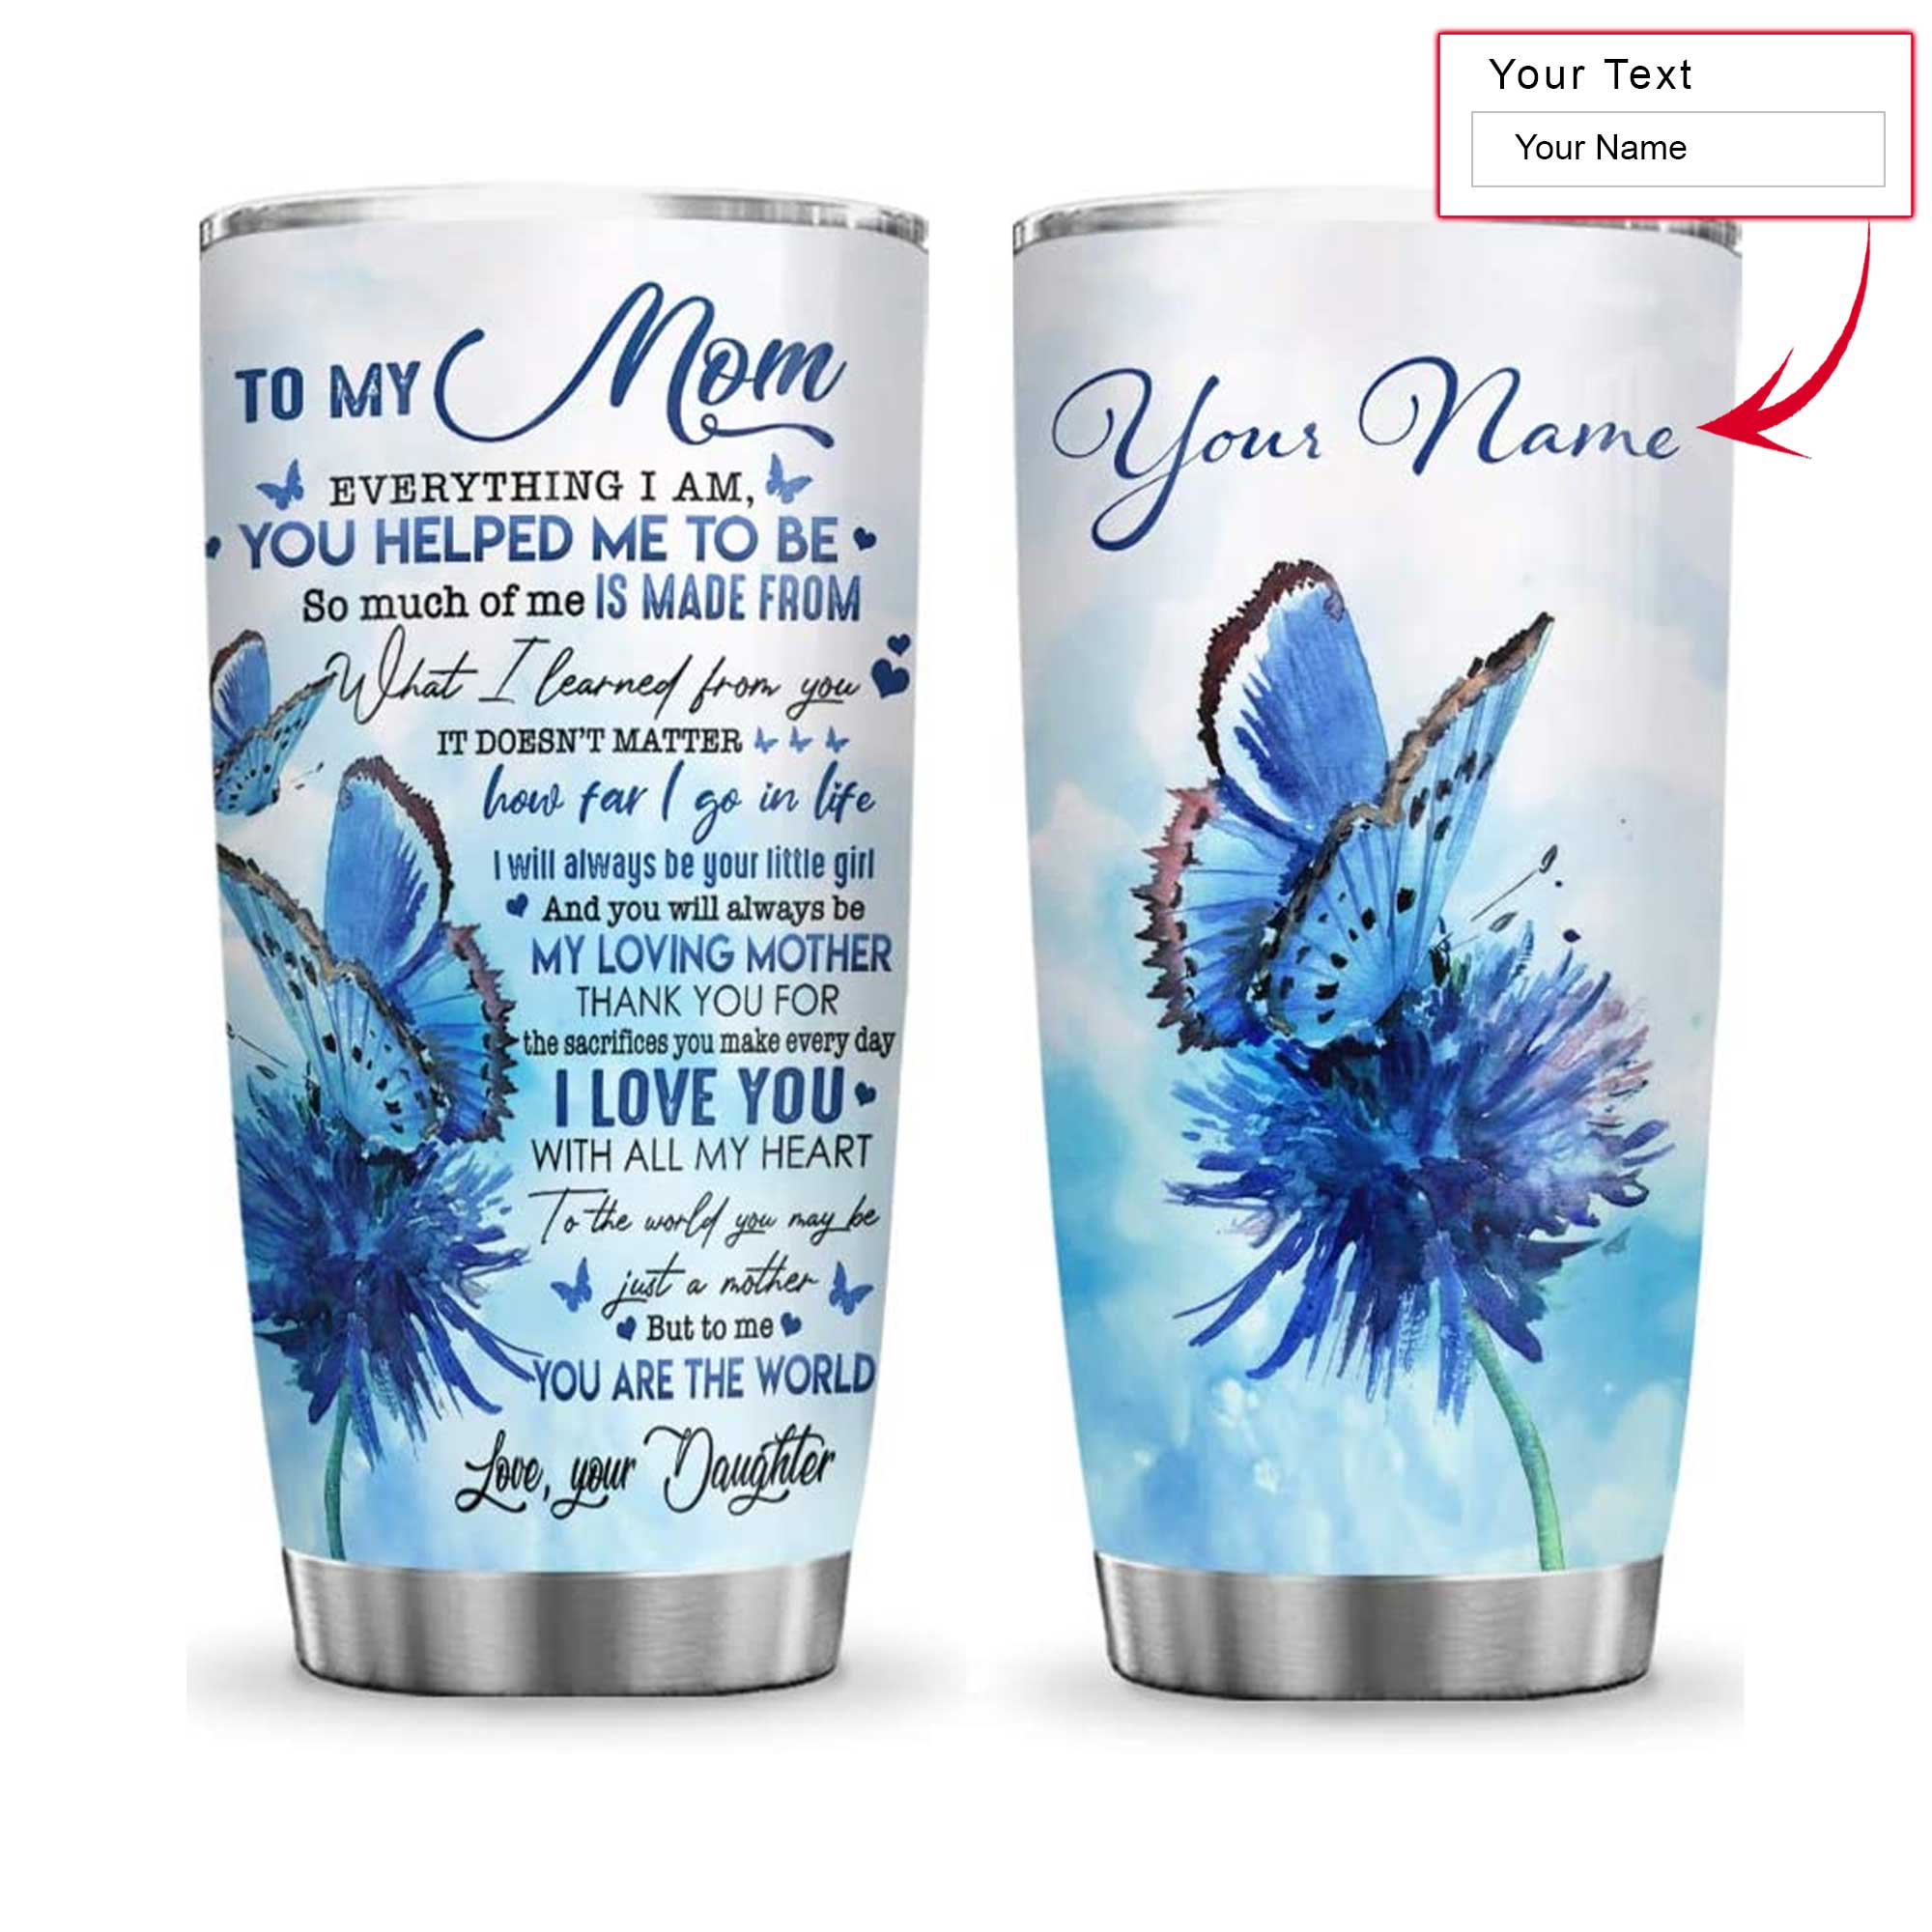 Personalized Mother's Day Gift Tumbler - Custom Gift For Mother's Day, Presents For Mom - My Mom Blue Butterfly Dandelion Inspiration Tumbler